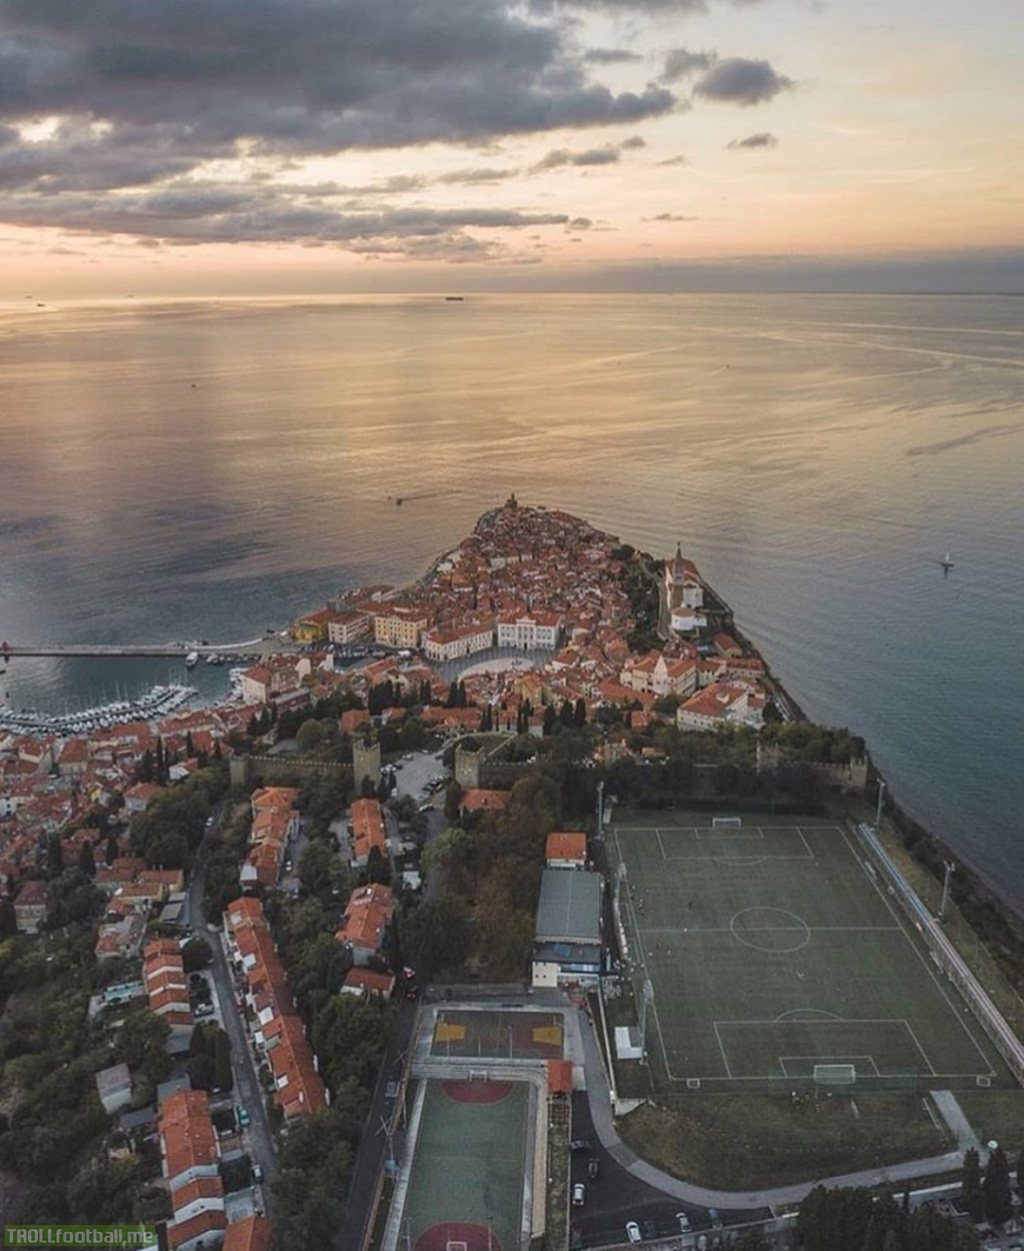 Playing football with a view. Piran, Slovenia